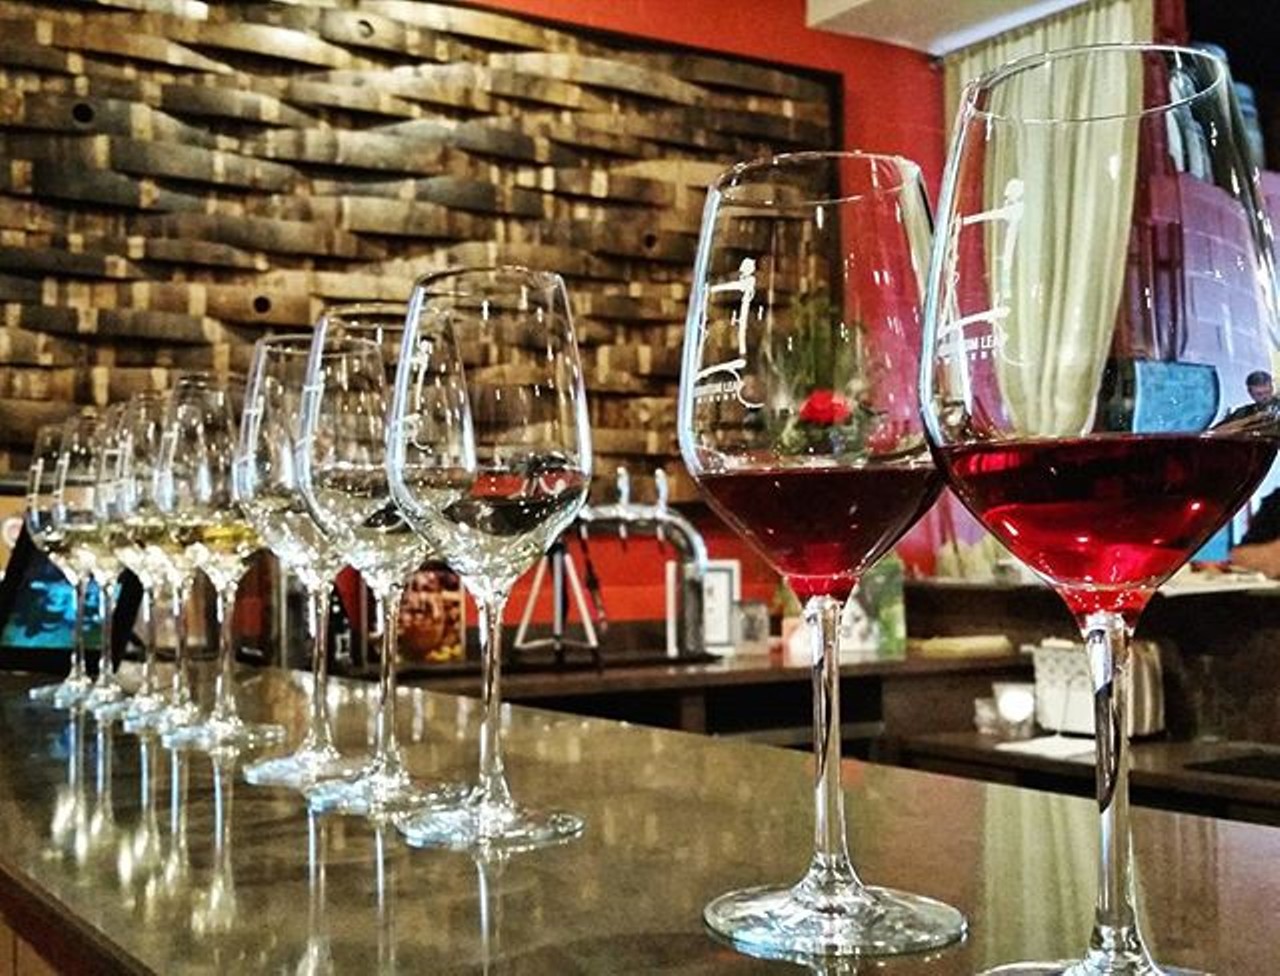 Develop new tastes at the Quantum Leap winery
1312 Wilfred Drive, Orlando, 407-730-3082
Be connoisseurs on the cheap at Quantum Leap. With a $5 tasting flight that includes three wines, you and your date can&#146;t go wrong. 
Photo via tastecooksip/Instagram